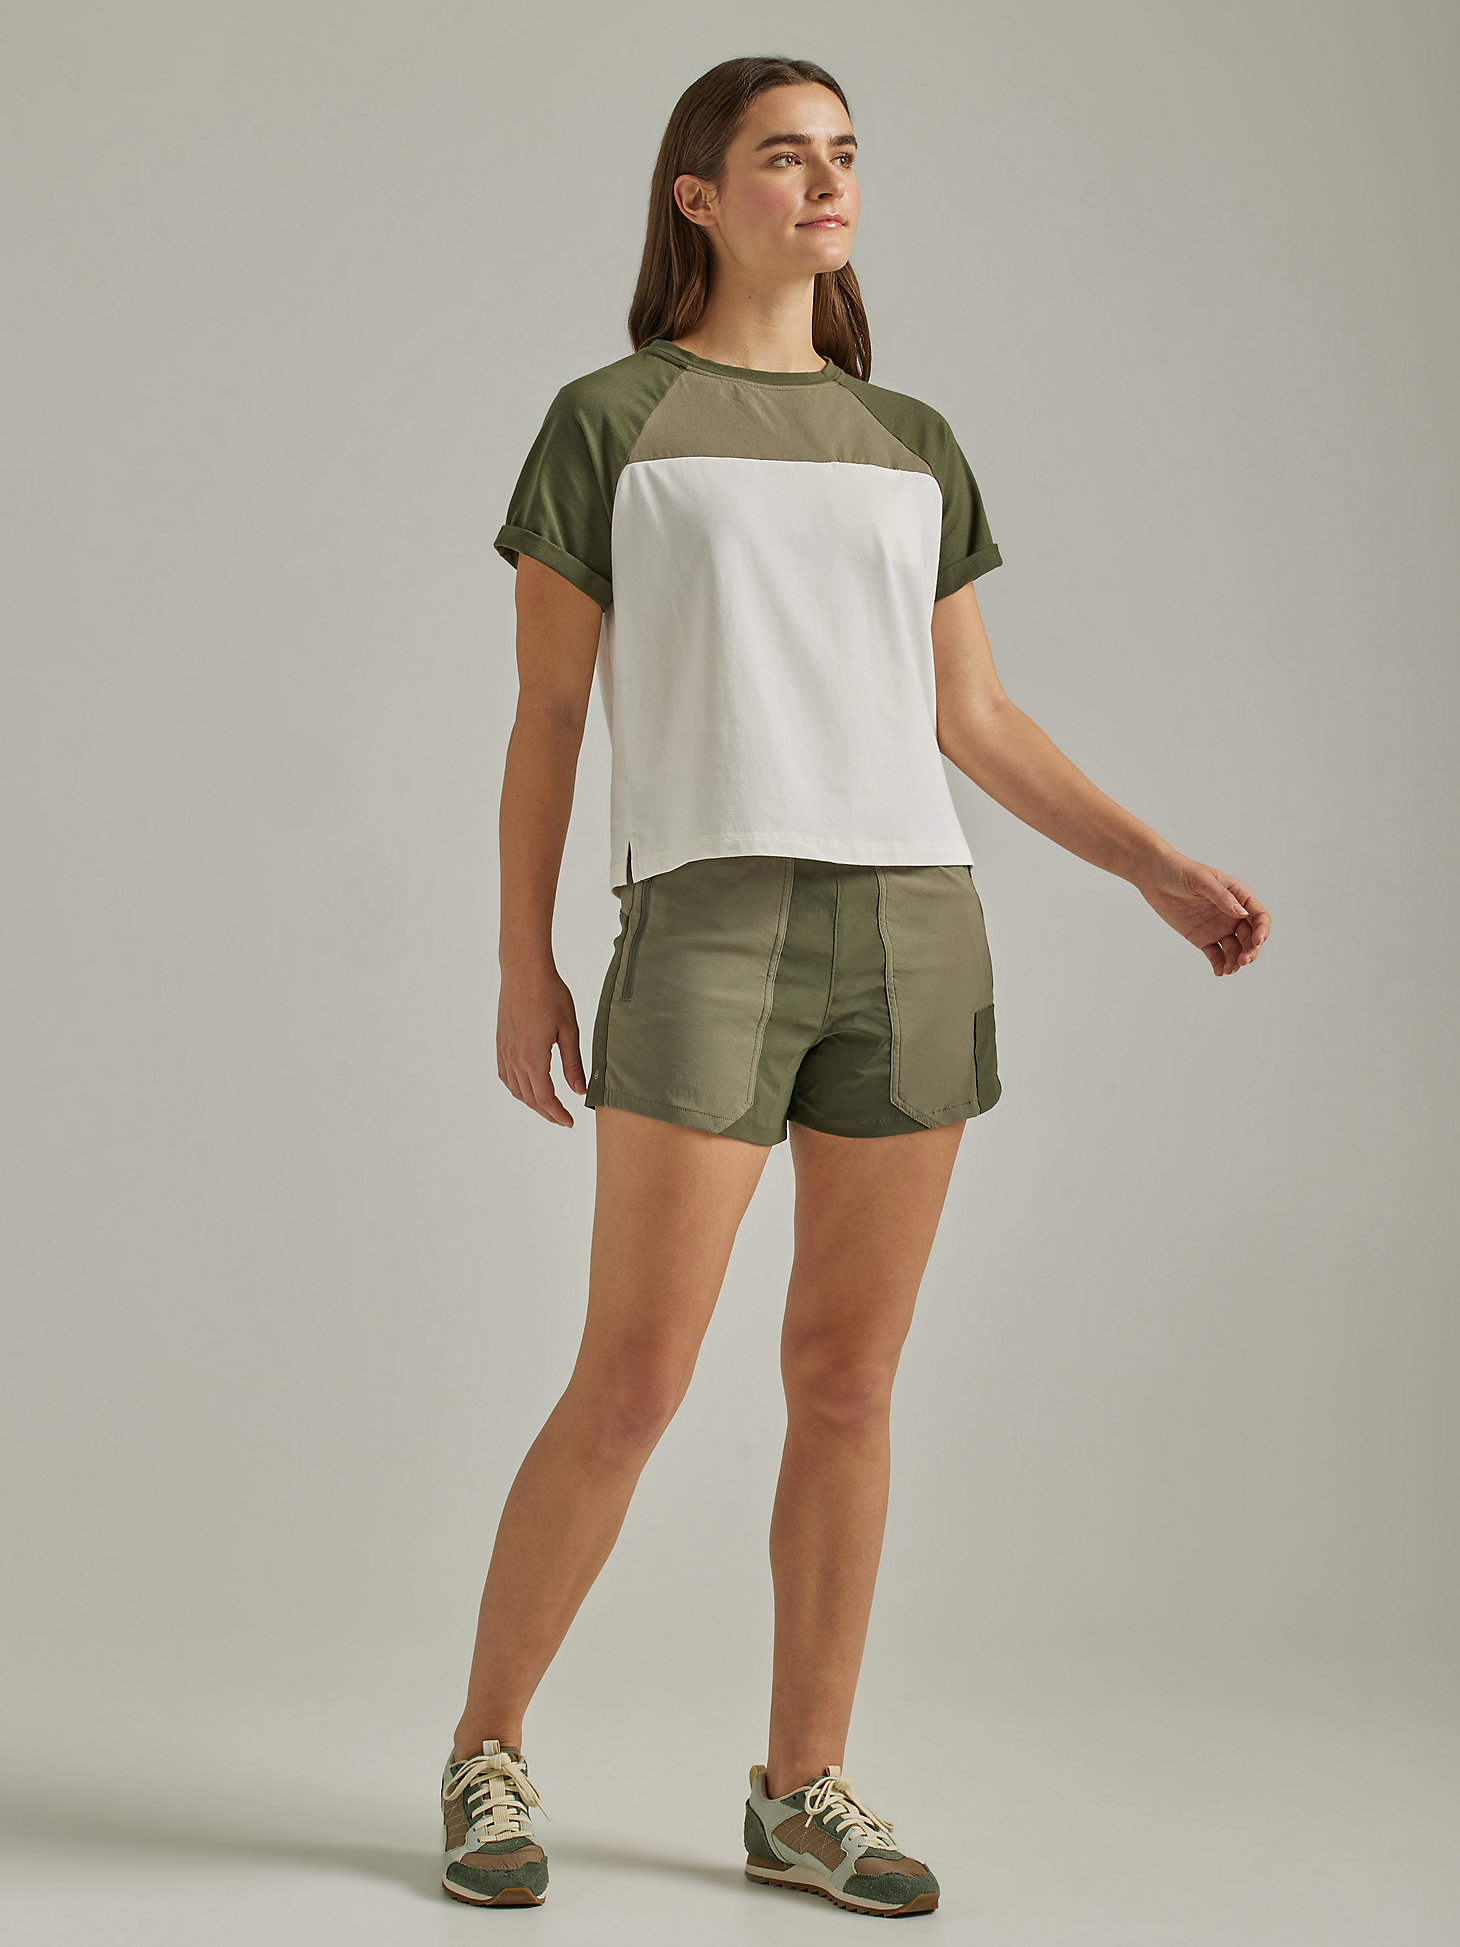 ATG By Wrangler® Women's Compass Tee in Dusty Olive alternative view 4